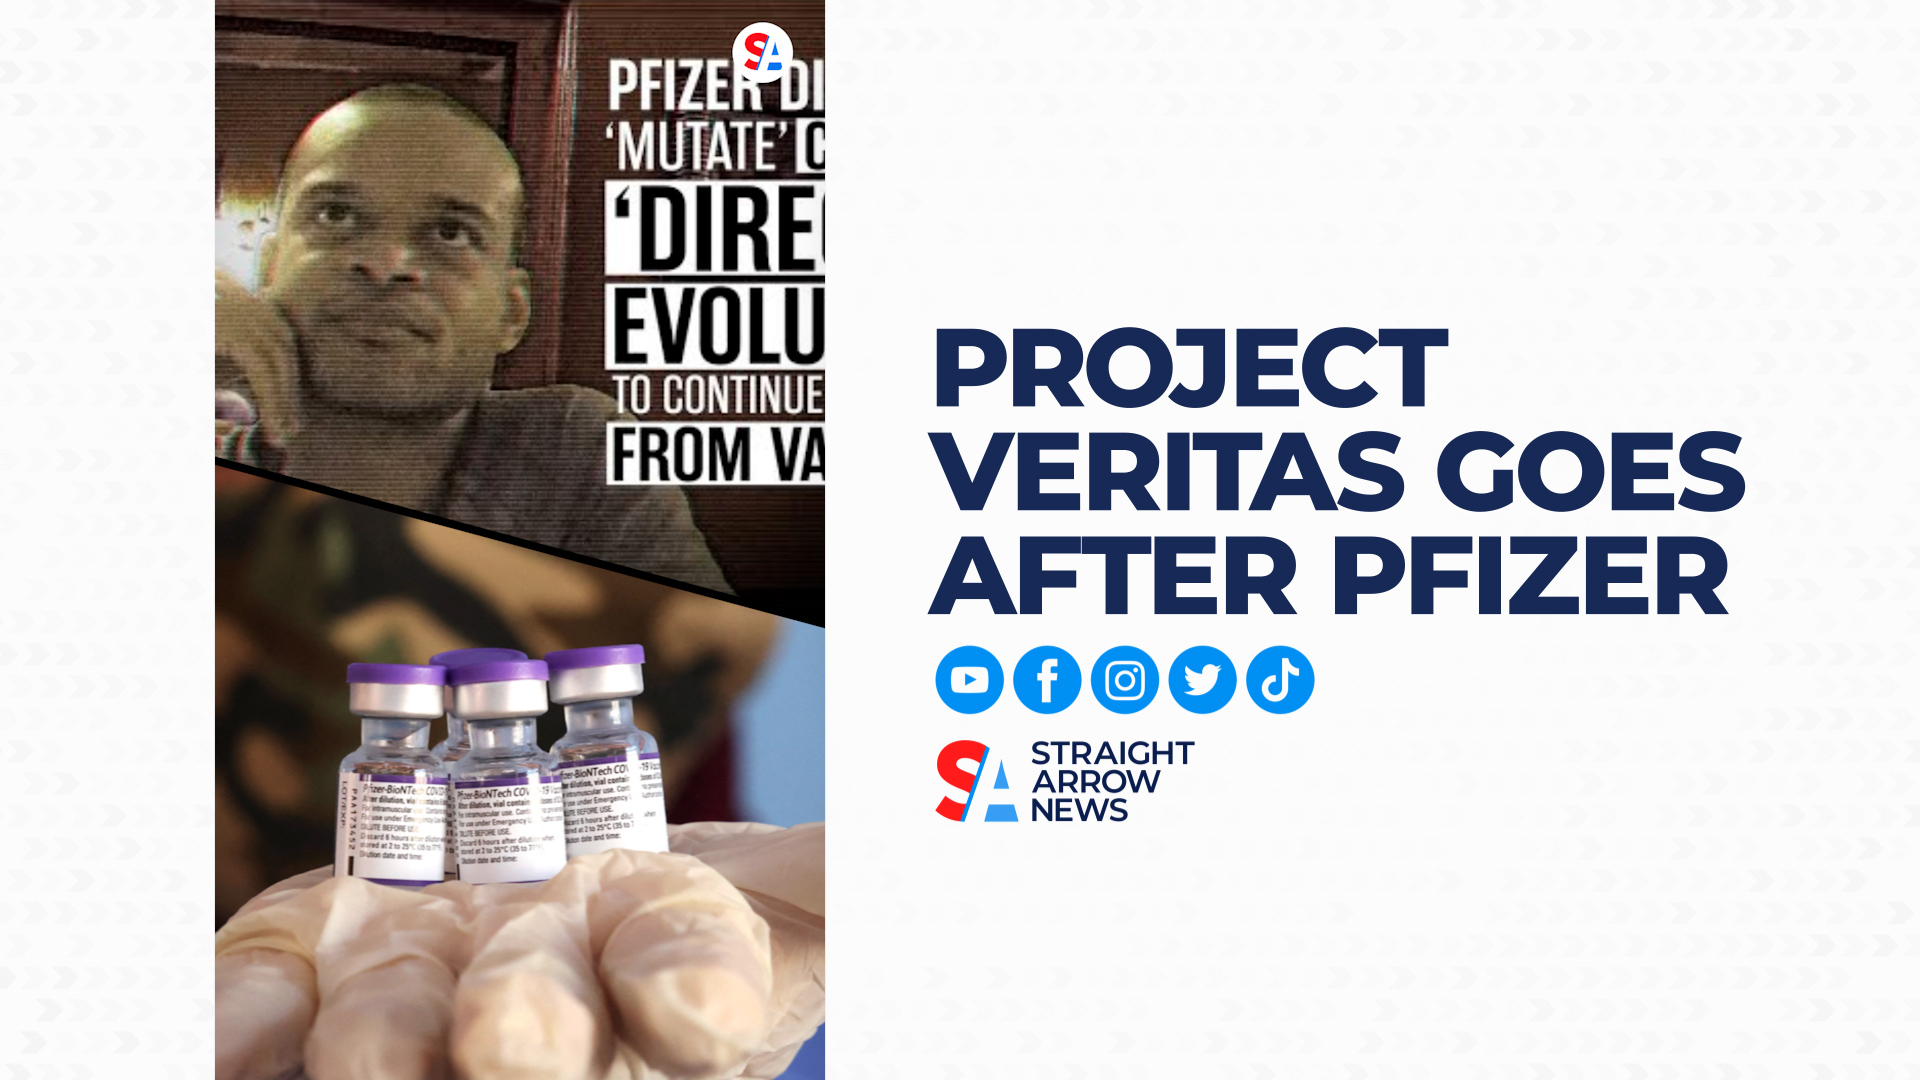 A Project Veritas video, which purportedly shows a Pfizer executive discussing coronavirus mutation, is sparking controversy online.